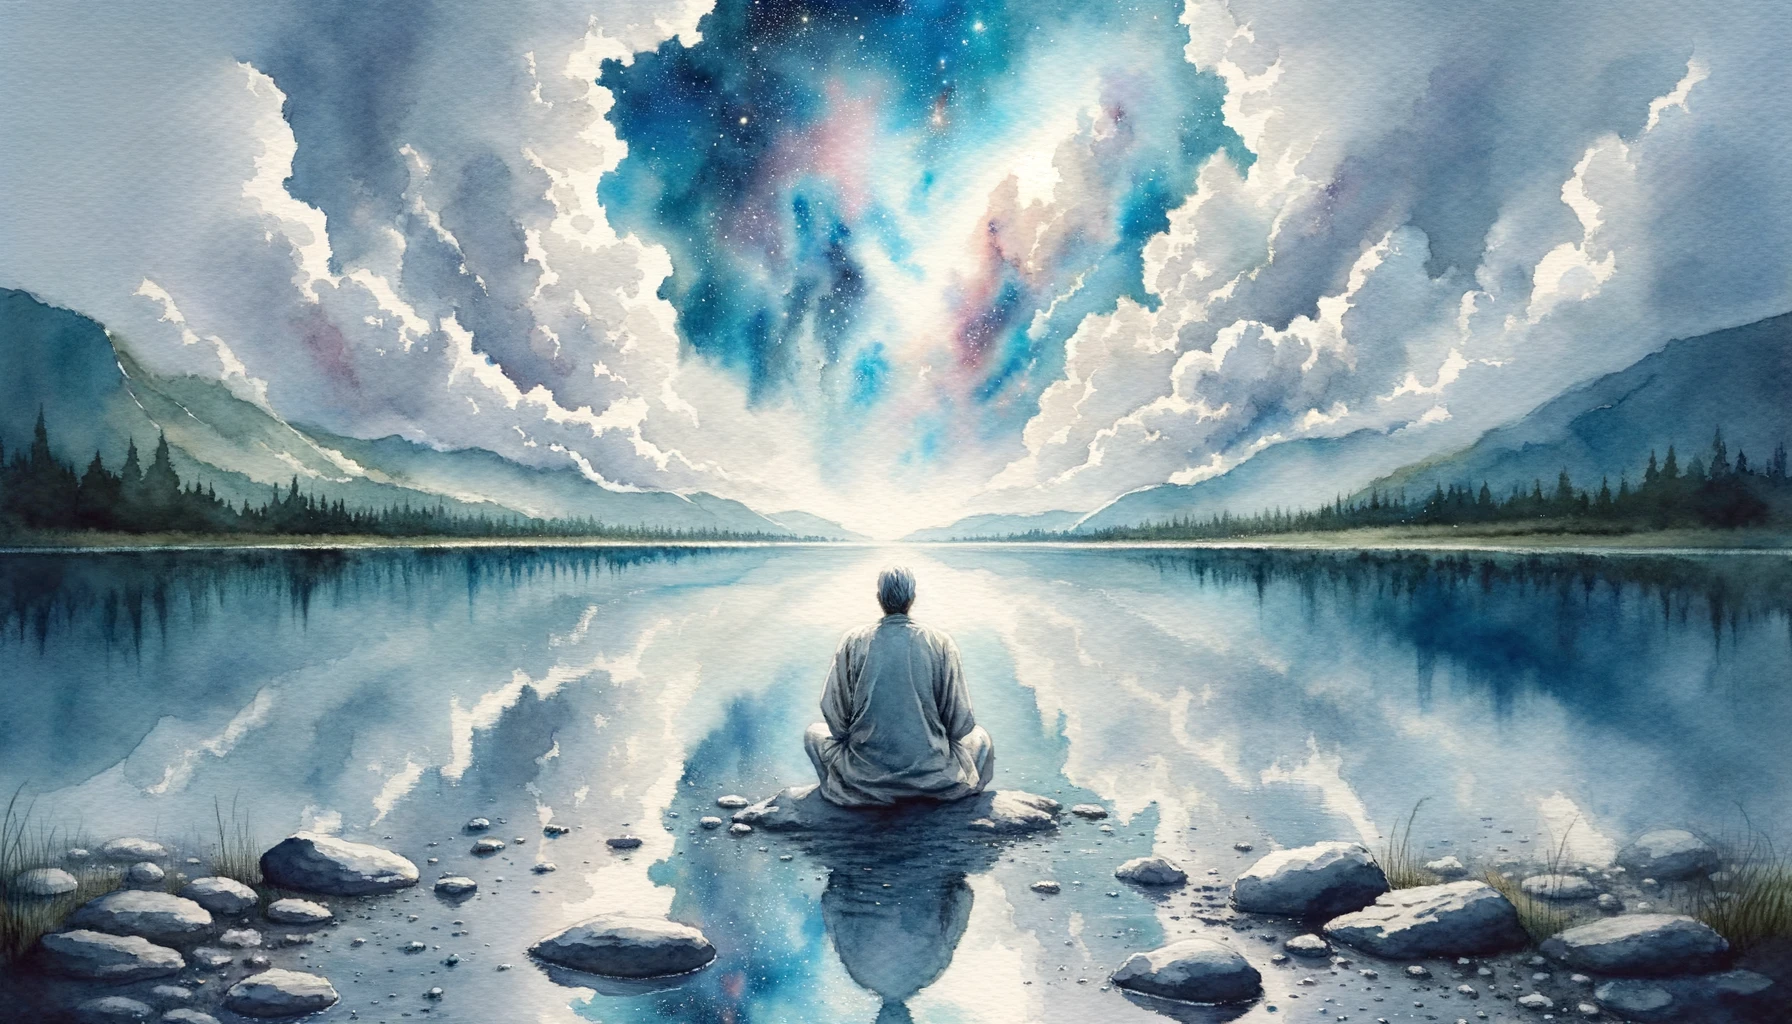 Contemplative figure by a calm lake reflects the heavens above, symbolizing God's subtle presence in moments of introspection.